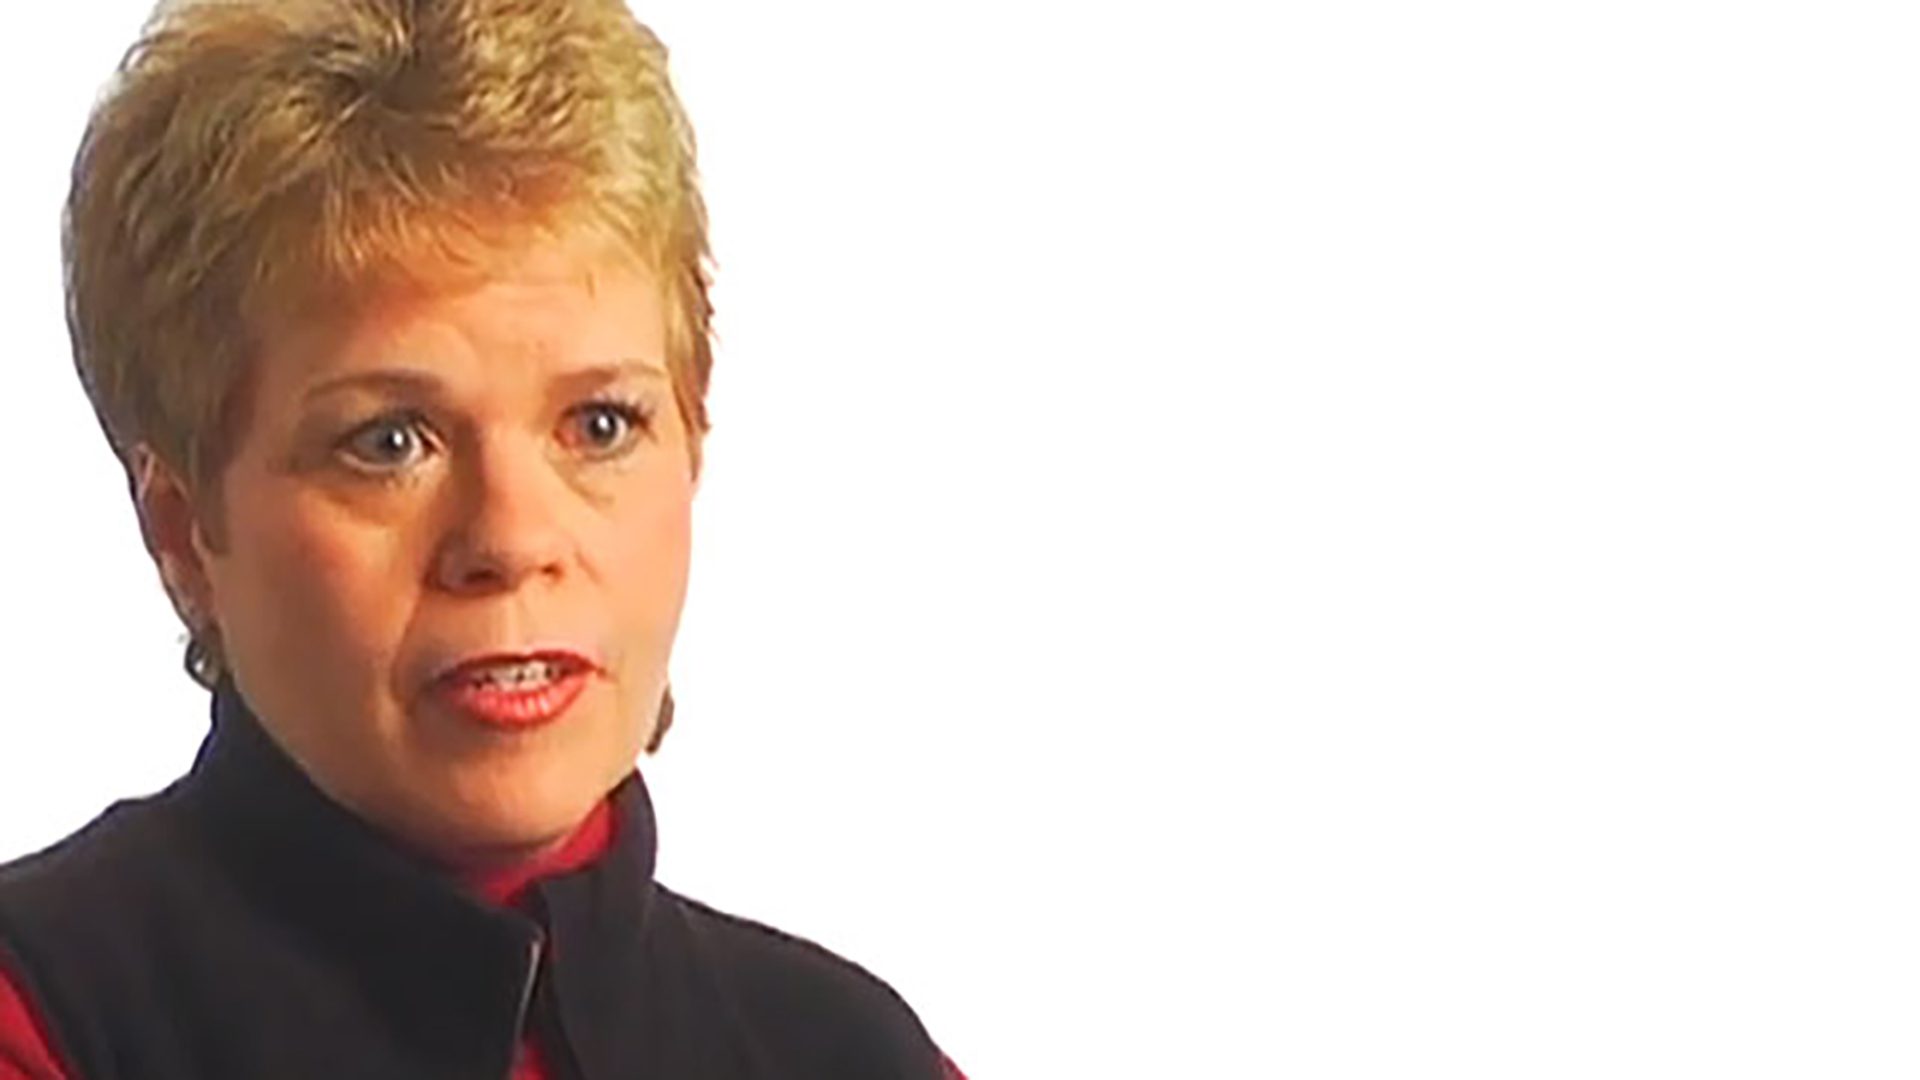 A middle-aged woman with short blonde hair wears a red turtleneck and black vest. She is interviewed against a white background.